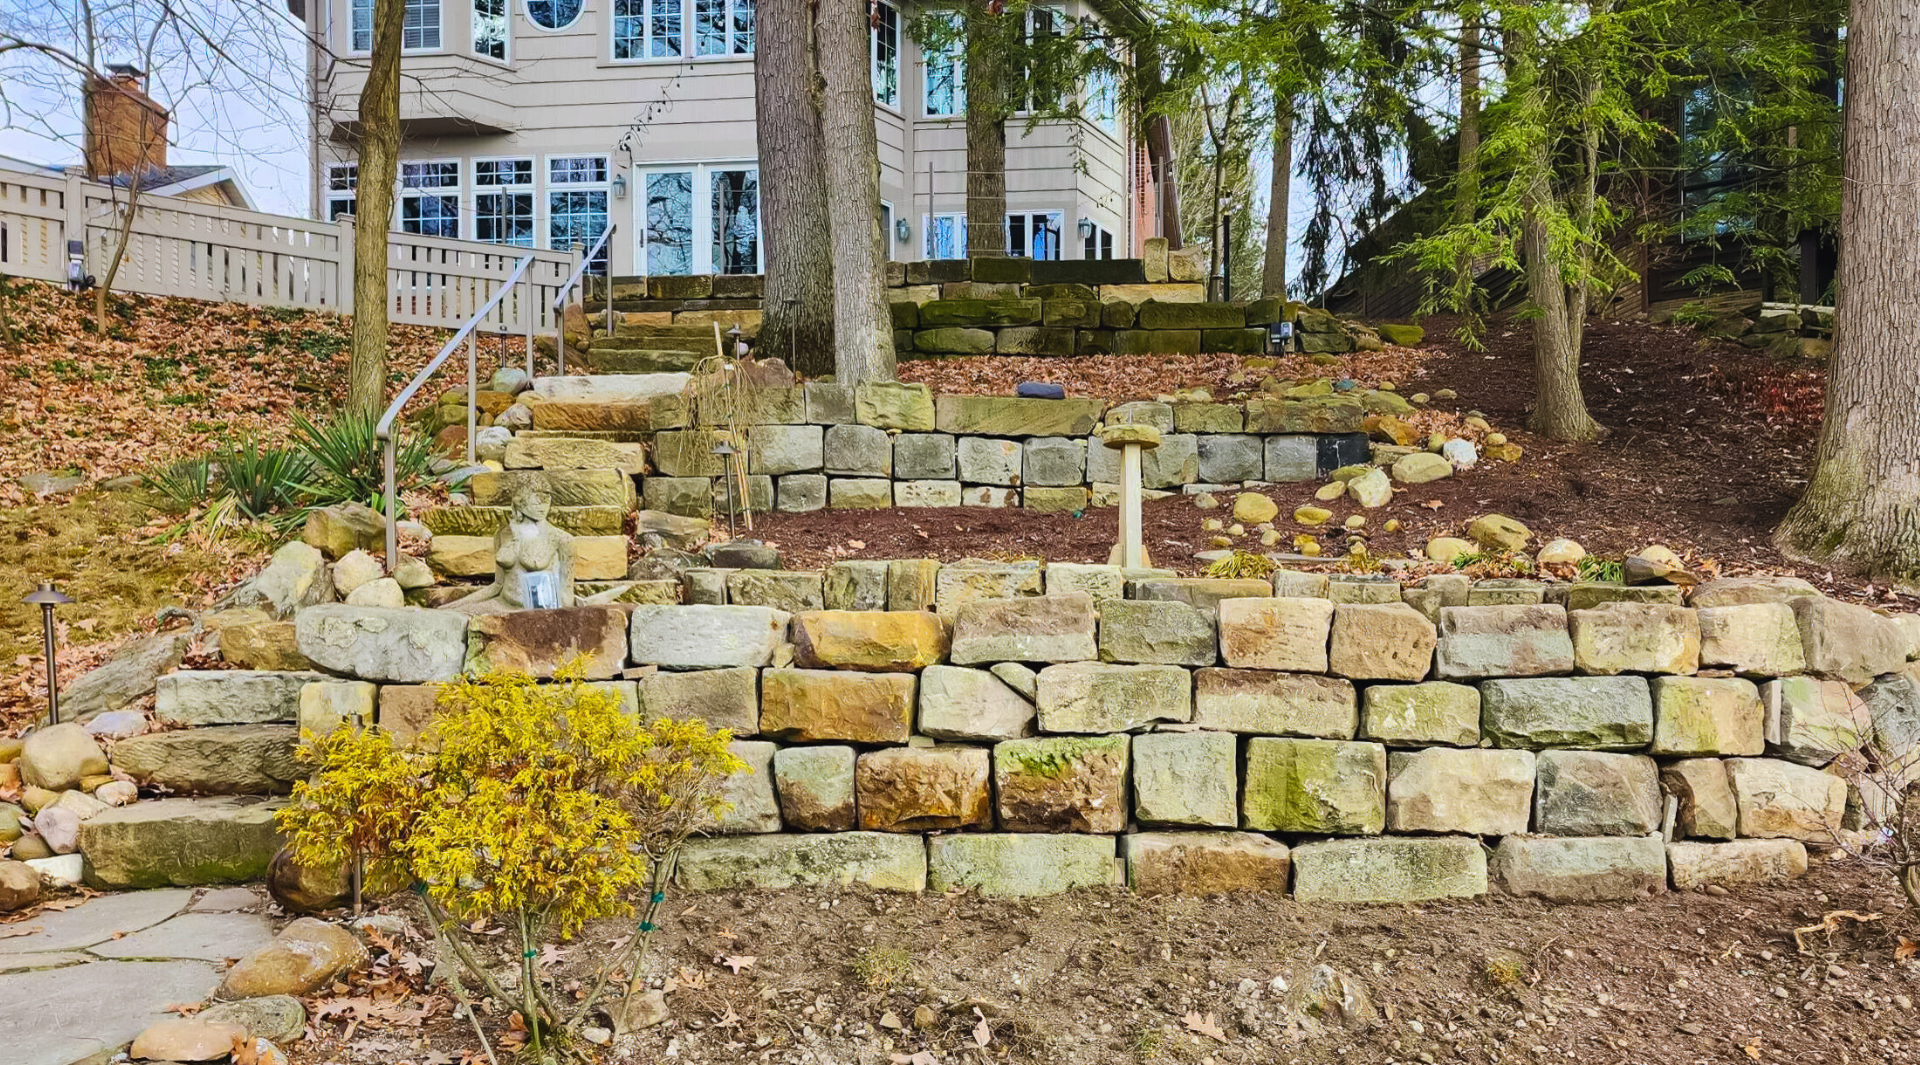 A stone wall in a yard with a house in the background.